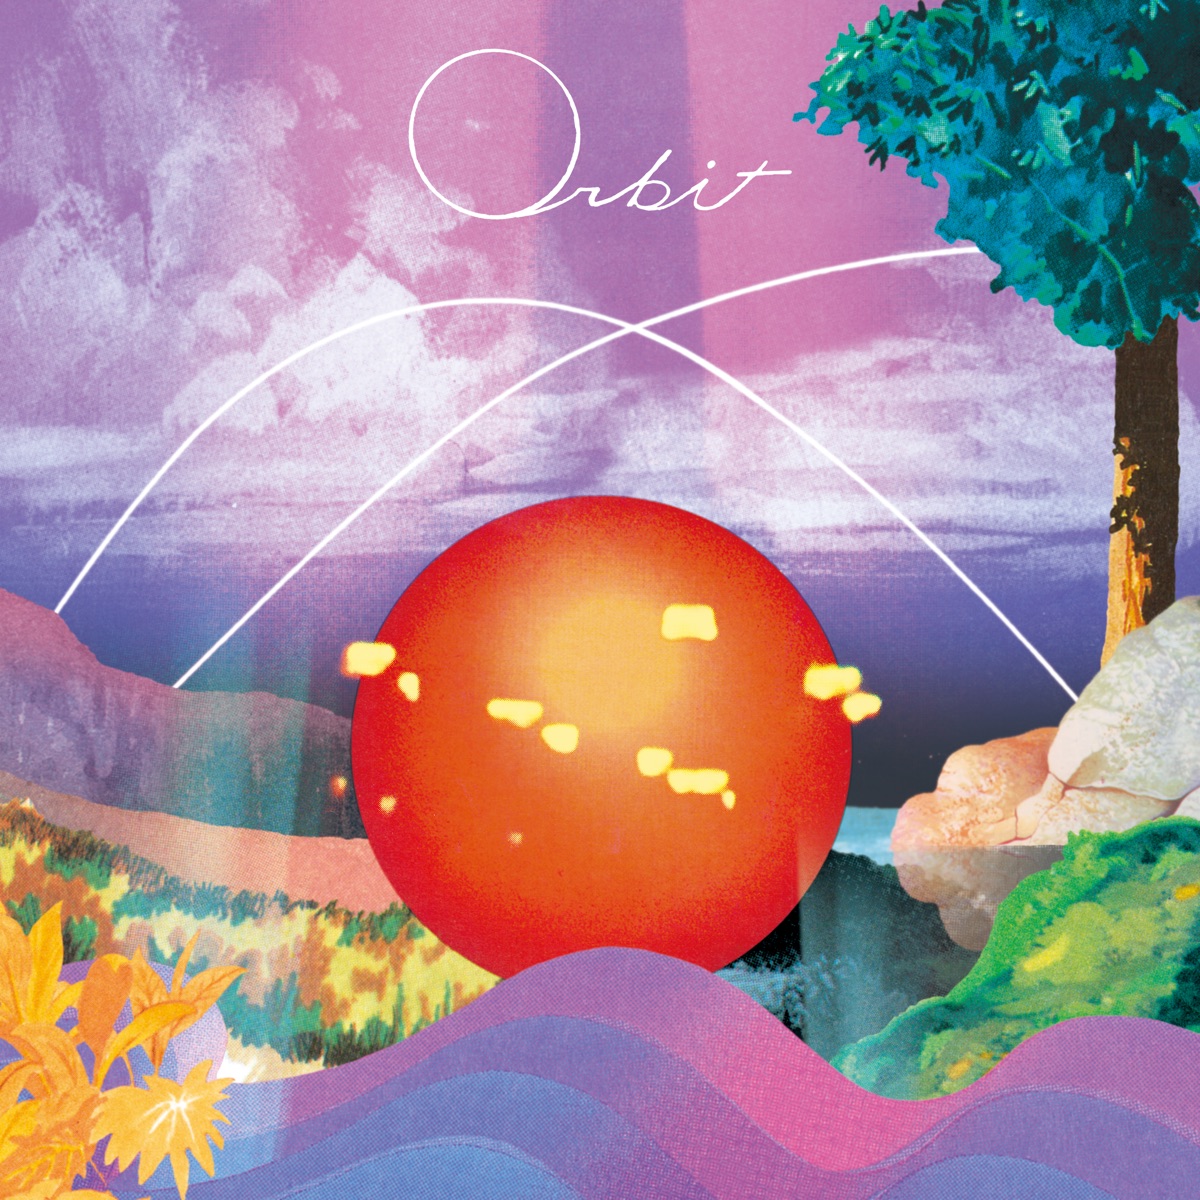 Cover art for『STUTS - タイミングでしょ (feat. Awich)』from the release『Orbit